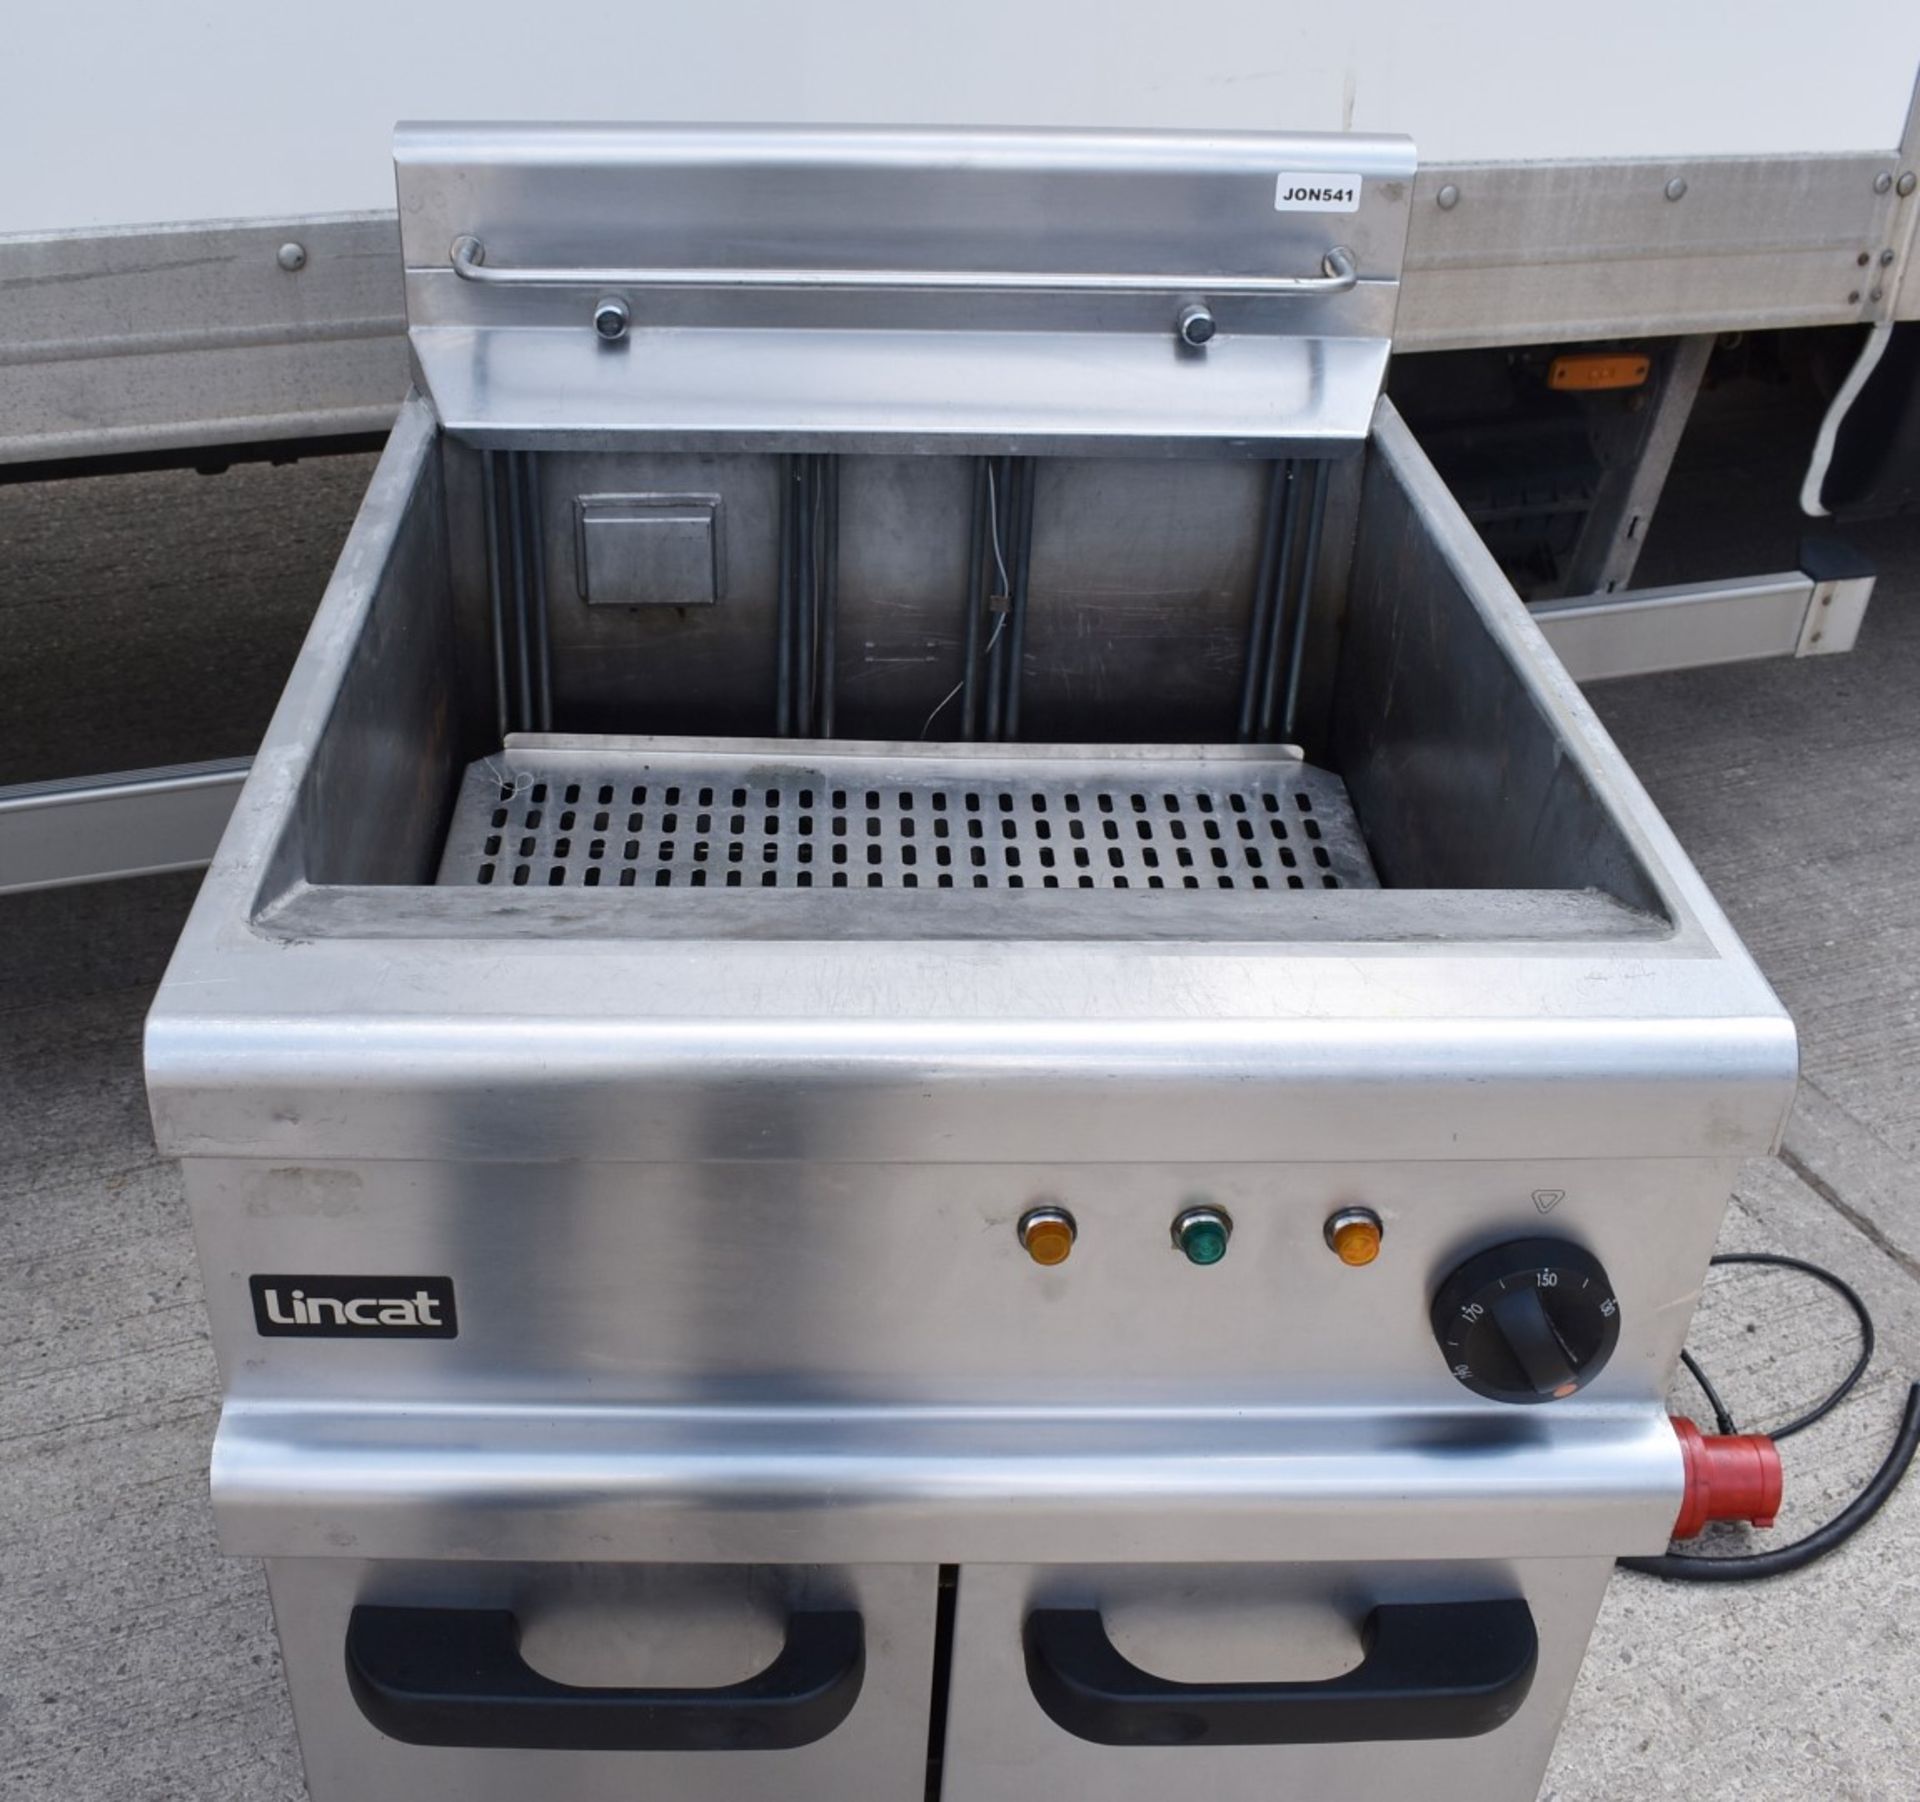 1 x Lincat Opus OE7108 Single Tank Electric Fryer With Filteration - 3 Phase Power - Image 10 of 10